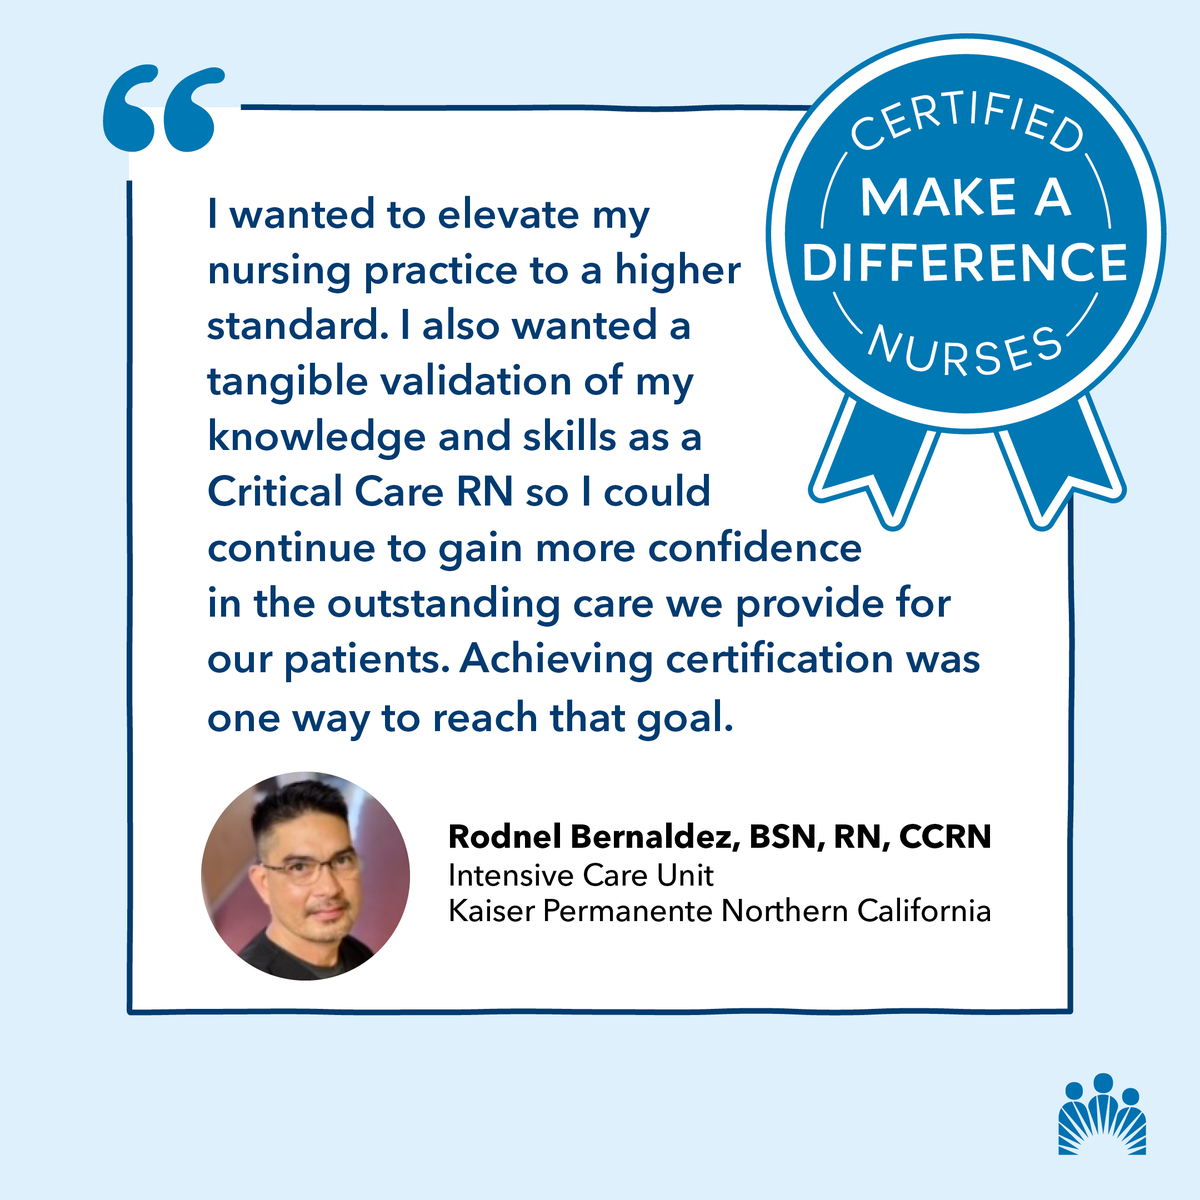 Thank you to our more than 2,000 certified nurses, like Rodnel, for your compassion and dedication to our patients! We appreciate and admire your continued learning! #CertifiedNursesDay  #ThankYouNurses